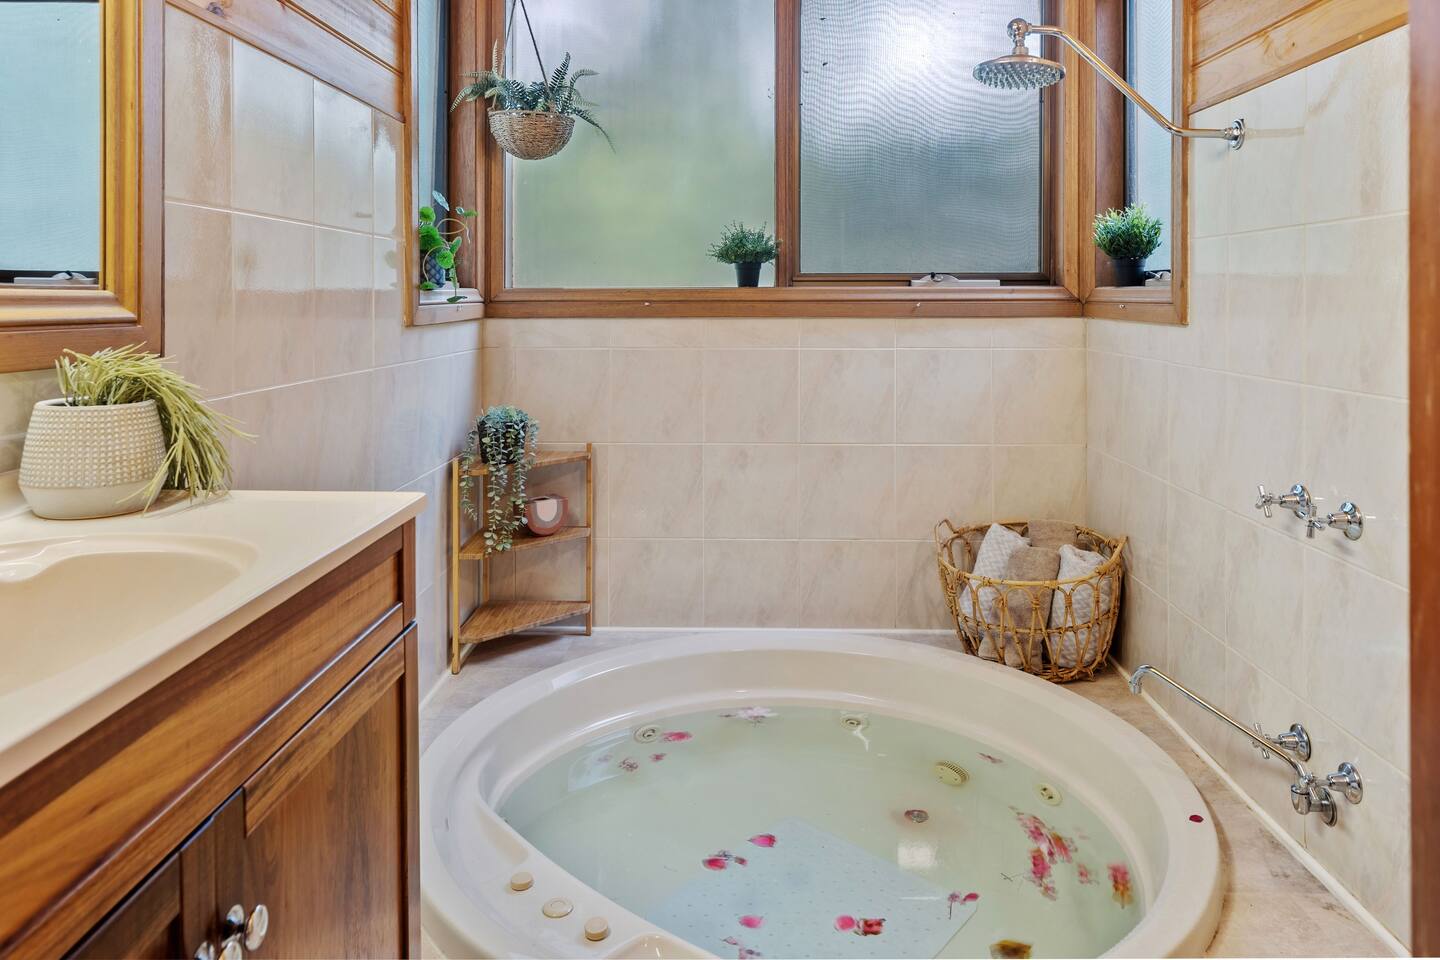 Hot tub in bathroom with rose flowers in water